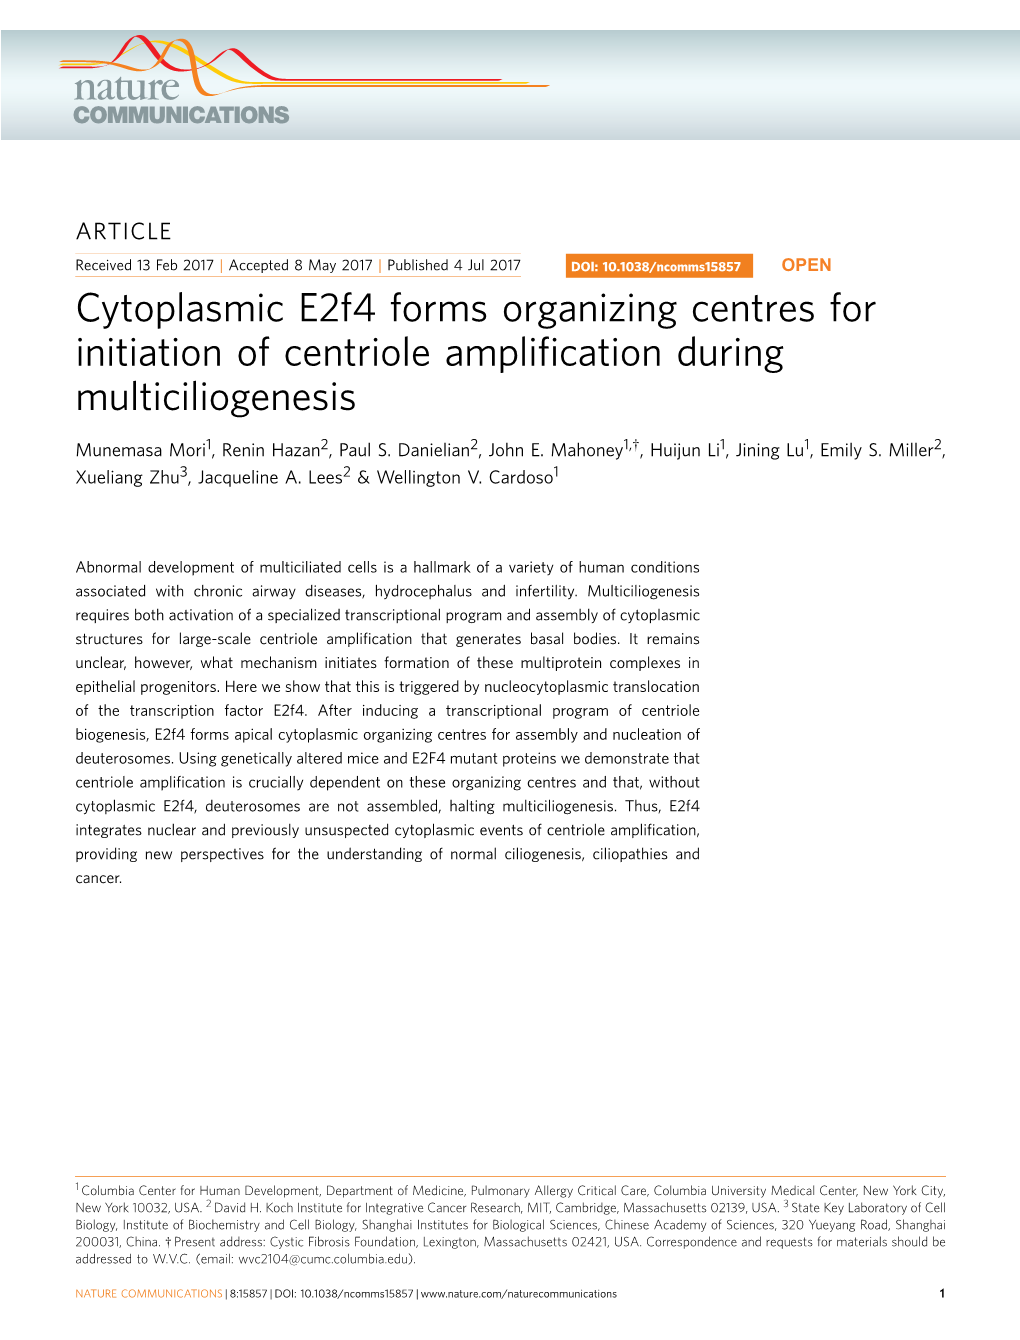 Cytoplasmic E2f4 Forms Organizing Centres for Initiation of Centriole Ampliﬁcation During Multiciliogenesis